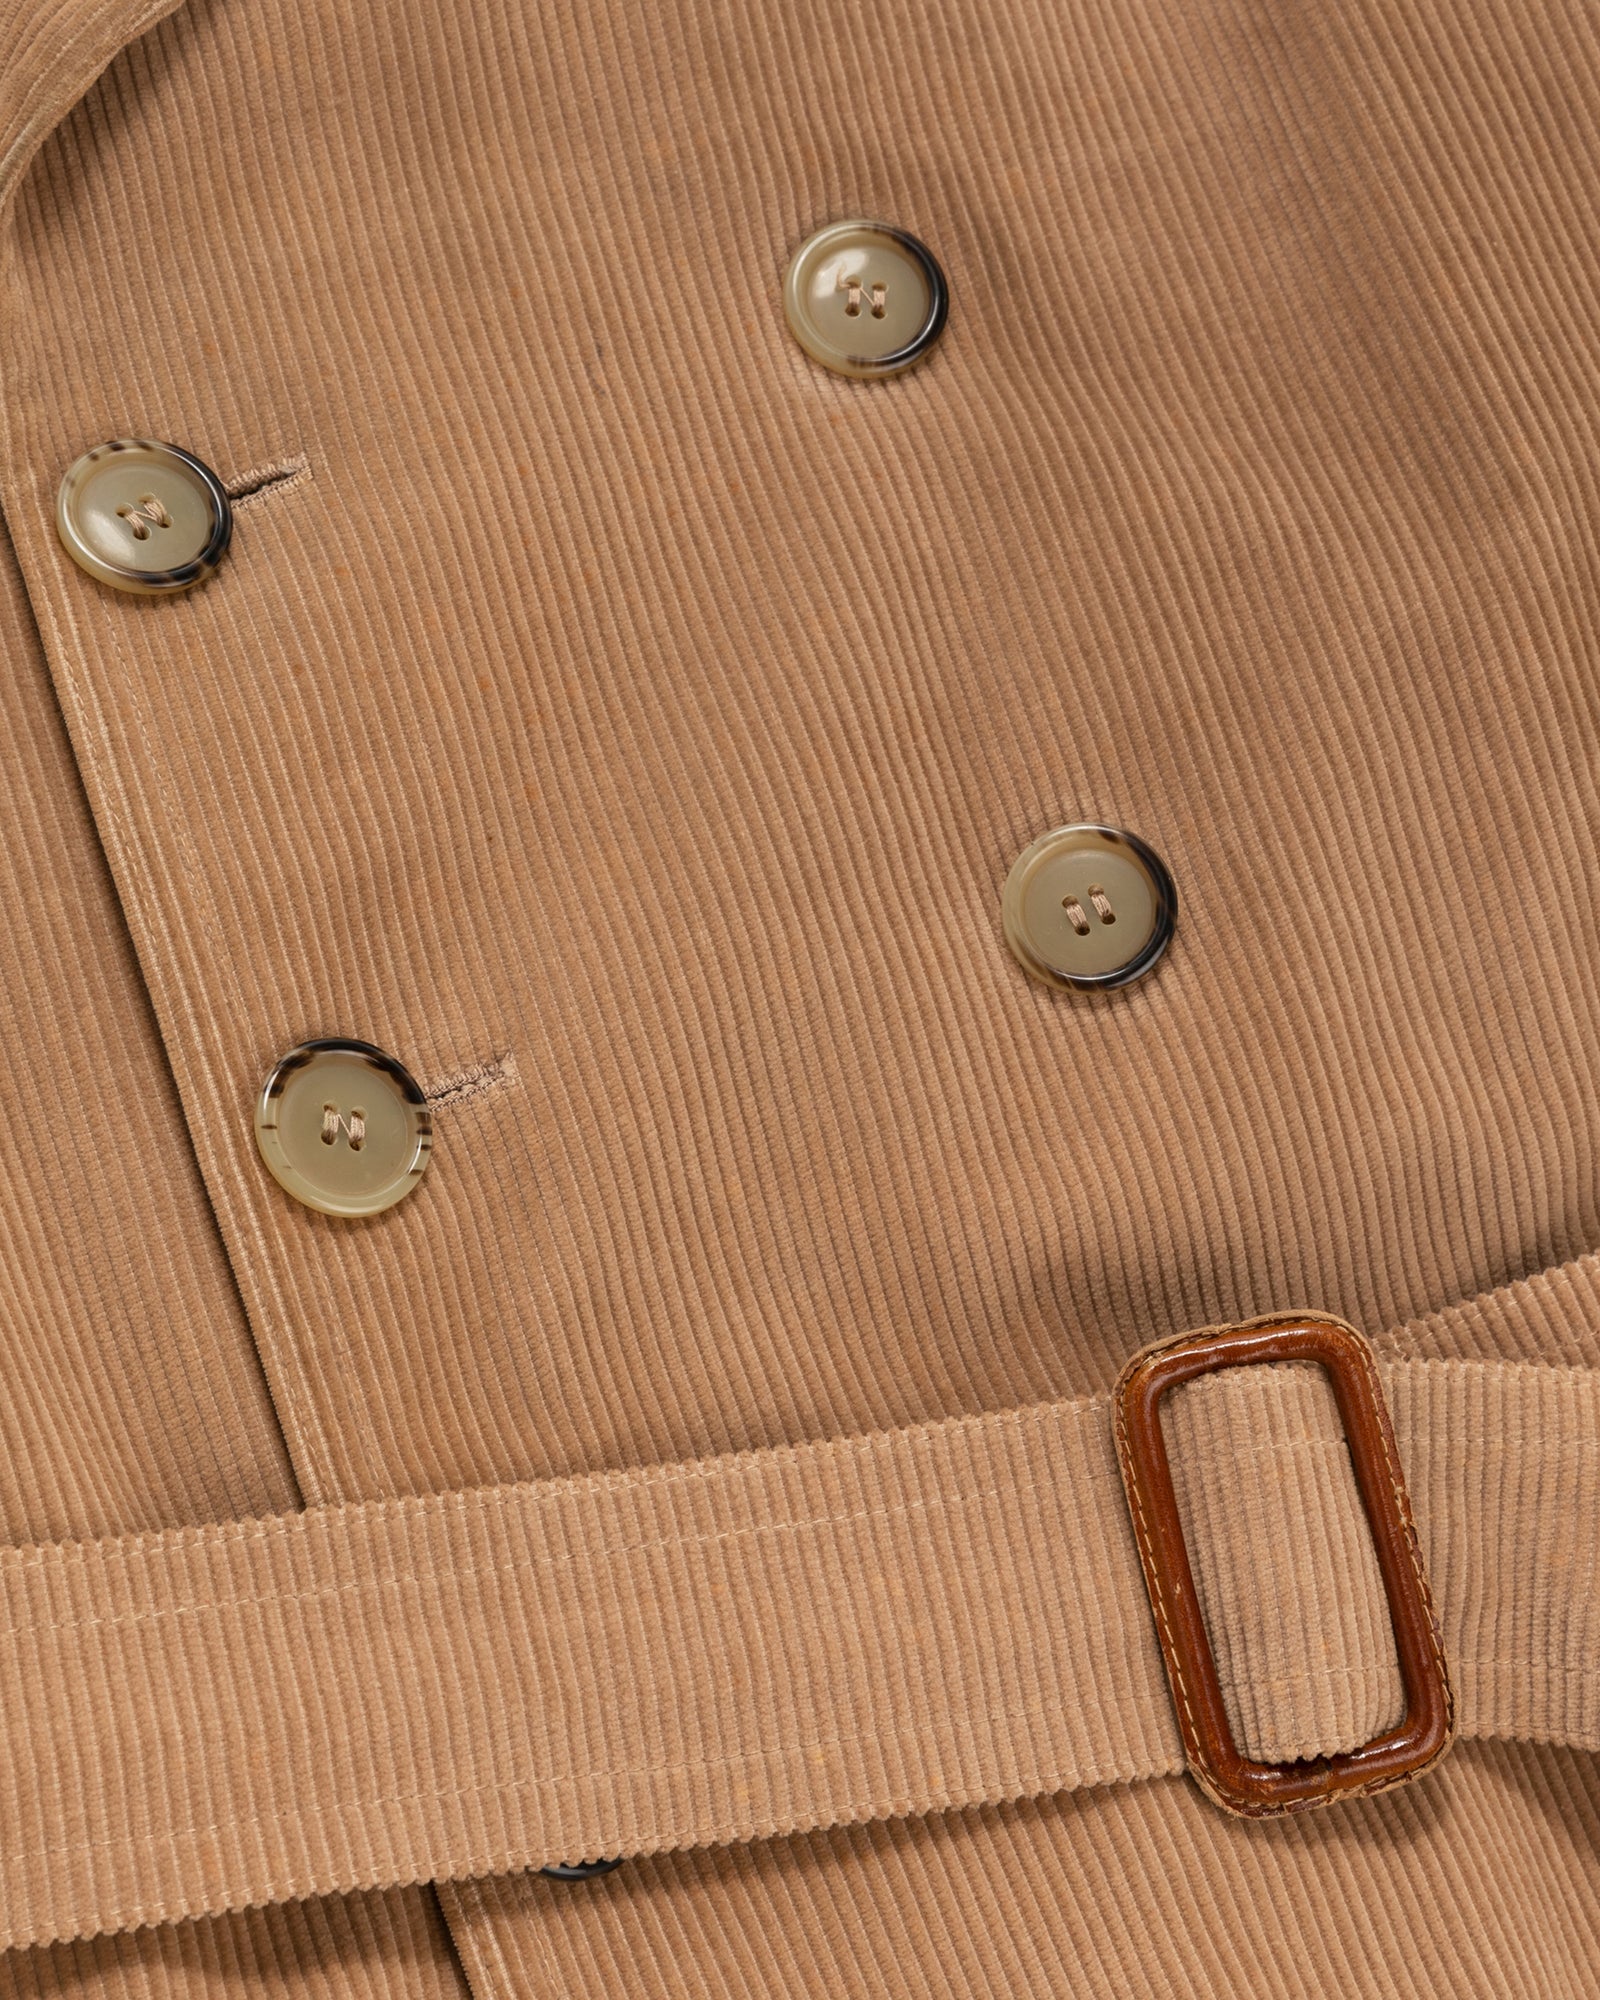 Tailor Made Corduroy Trench Coat